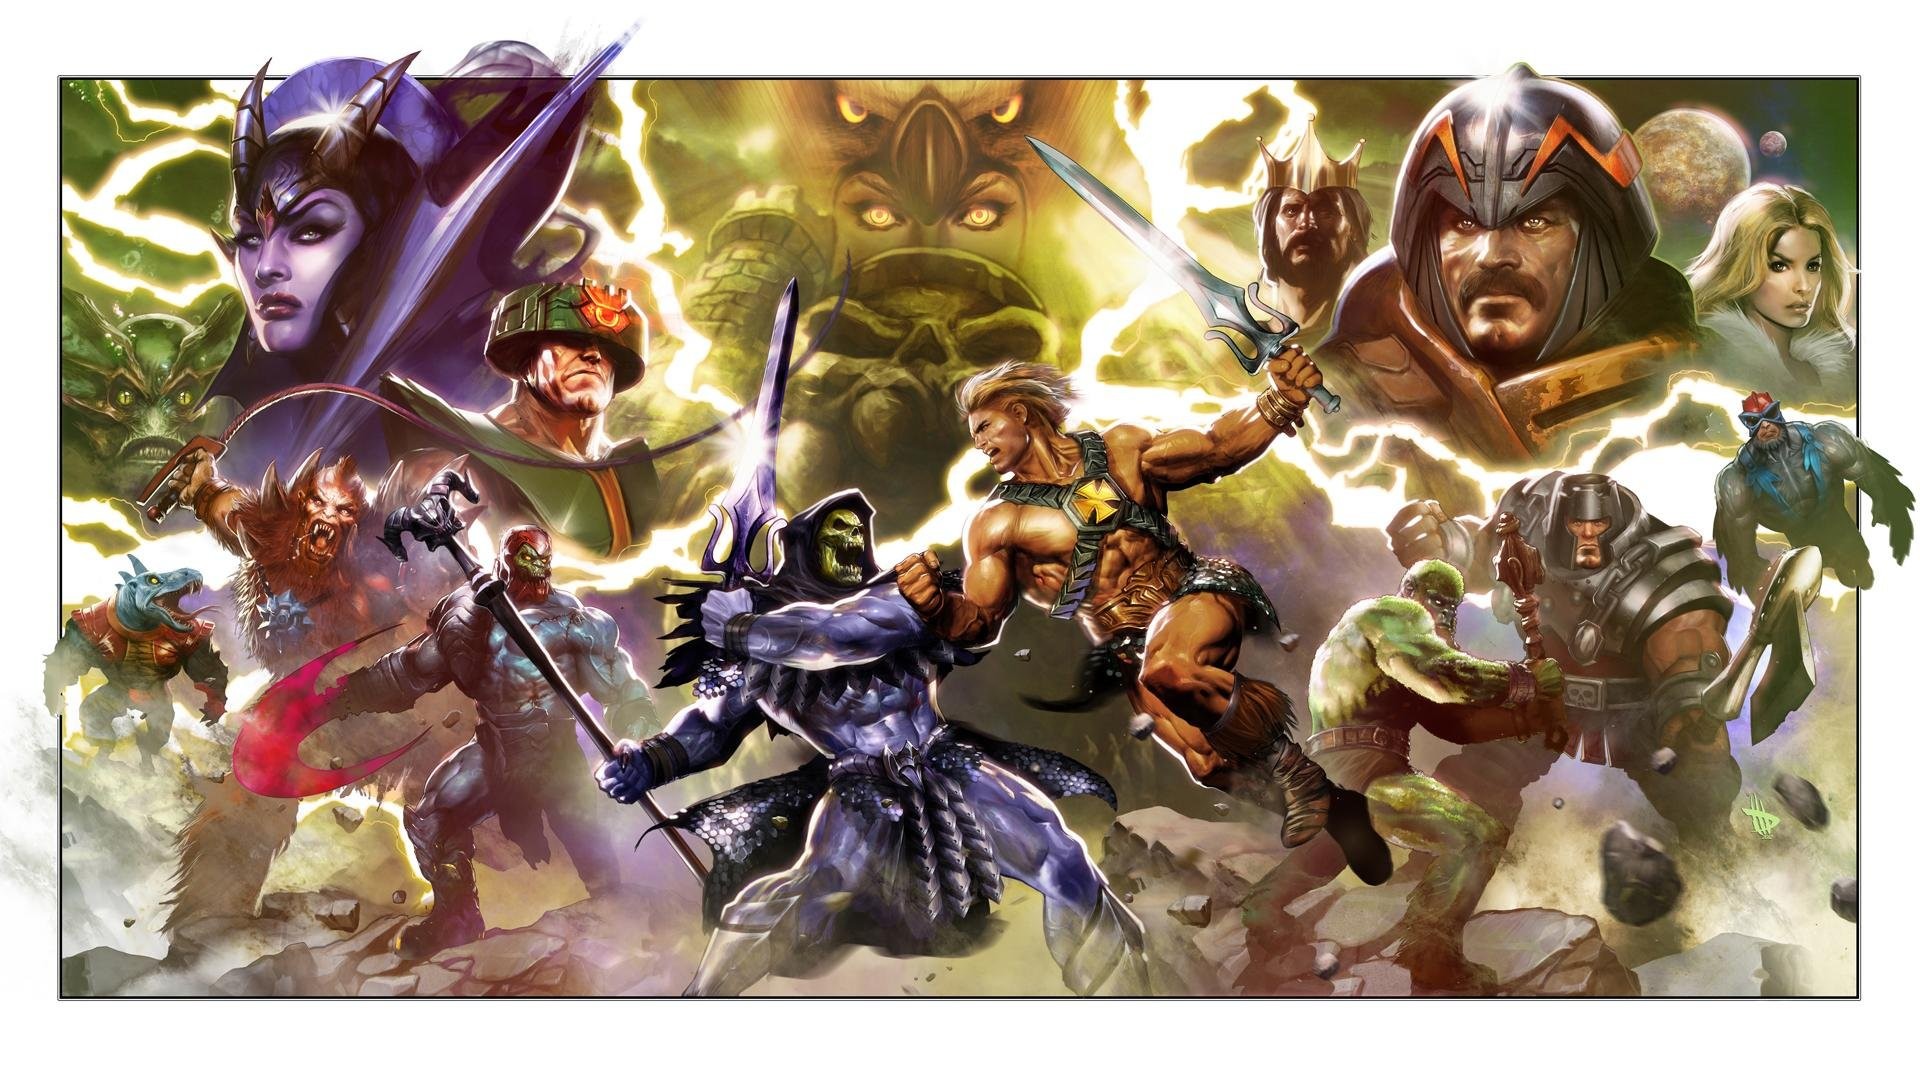 1920x1080 He-Man and the Masters of the Universe wallpaper |  | 284876 |  WallpaperUP